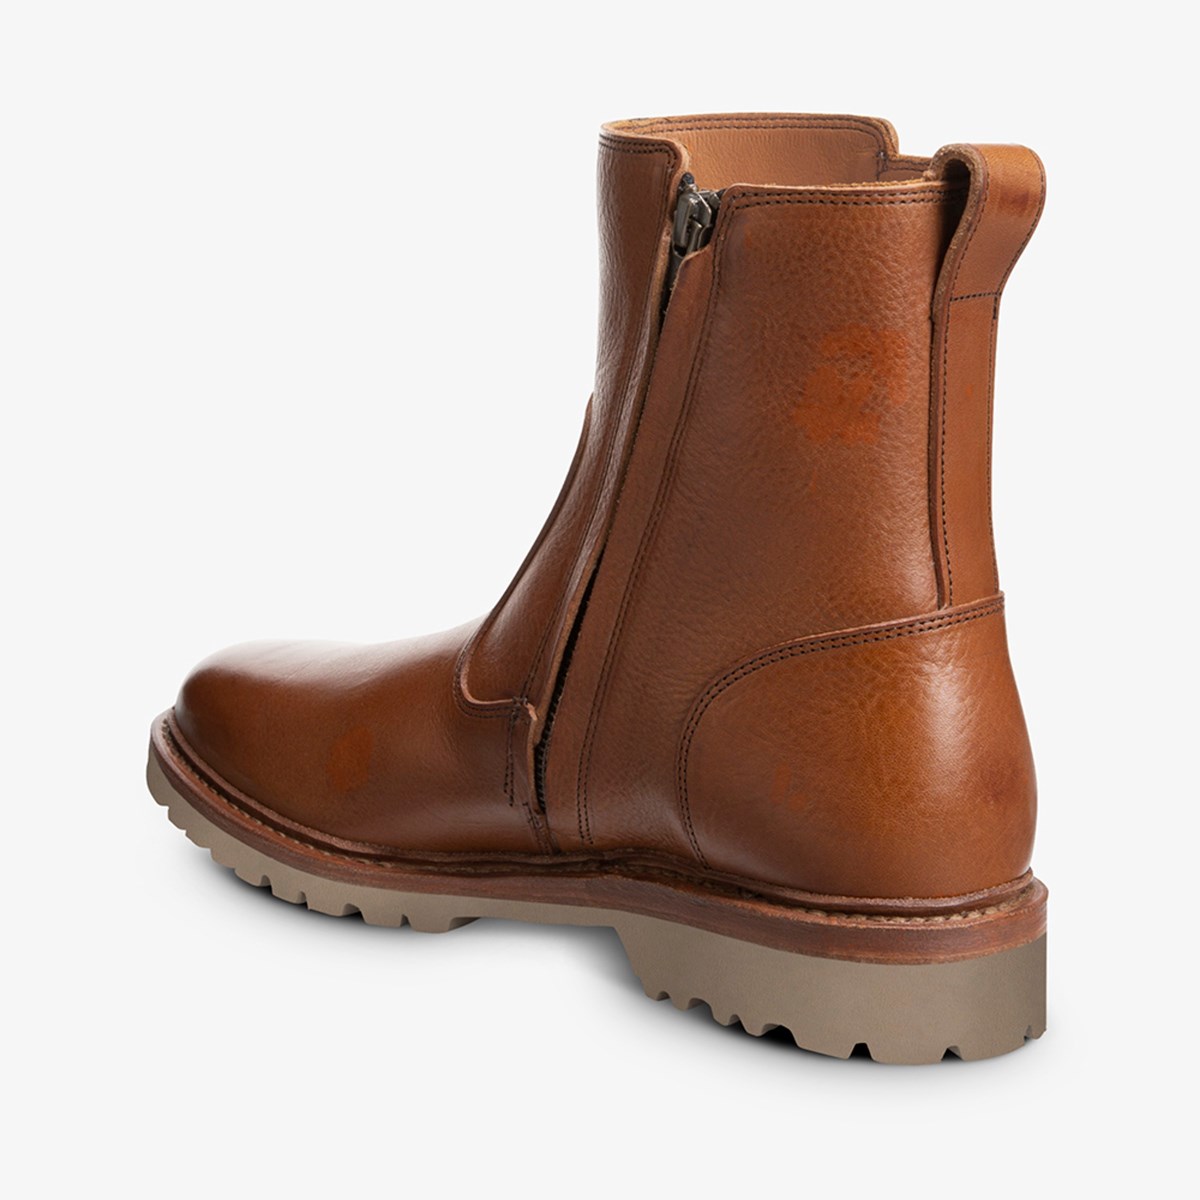 Discovery Chelsea Boot, Men's Boots